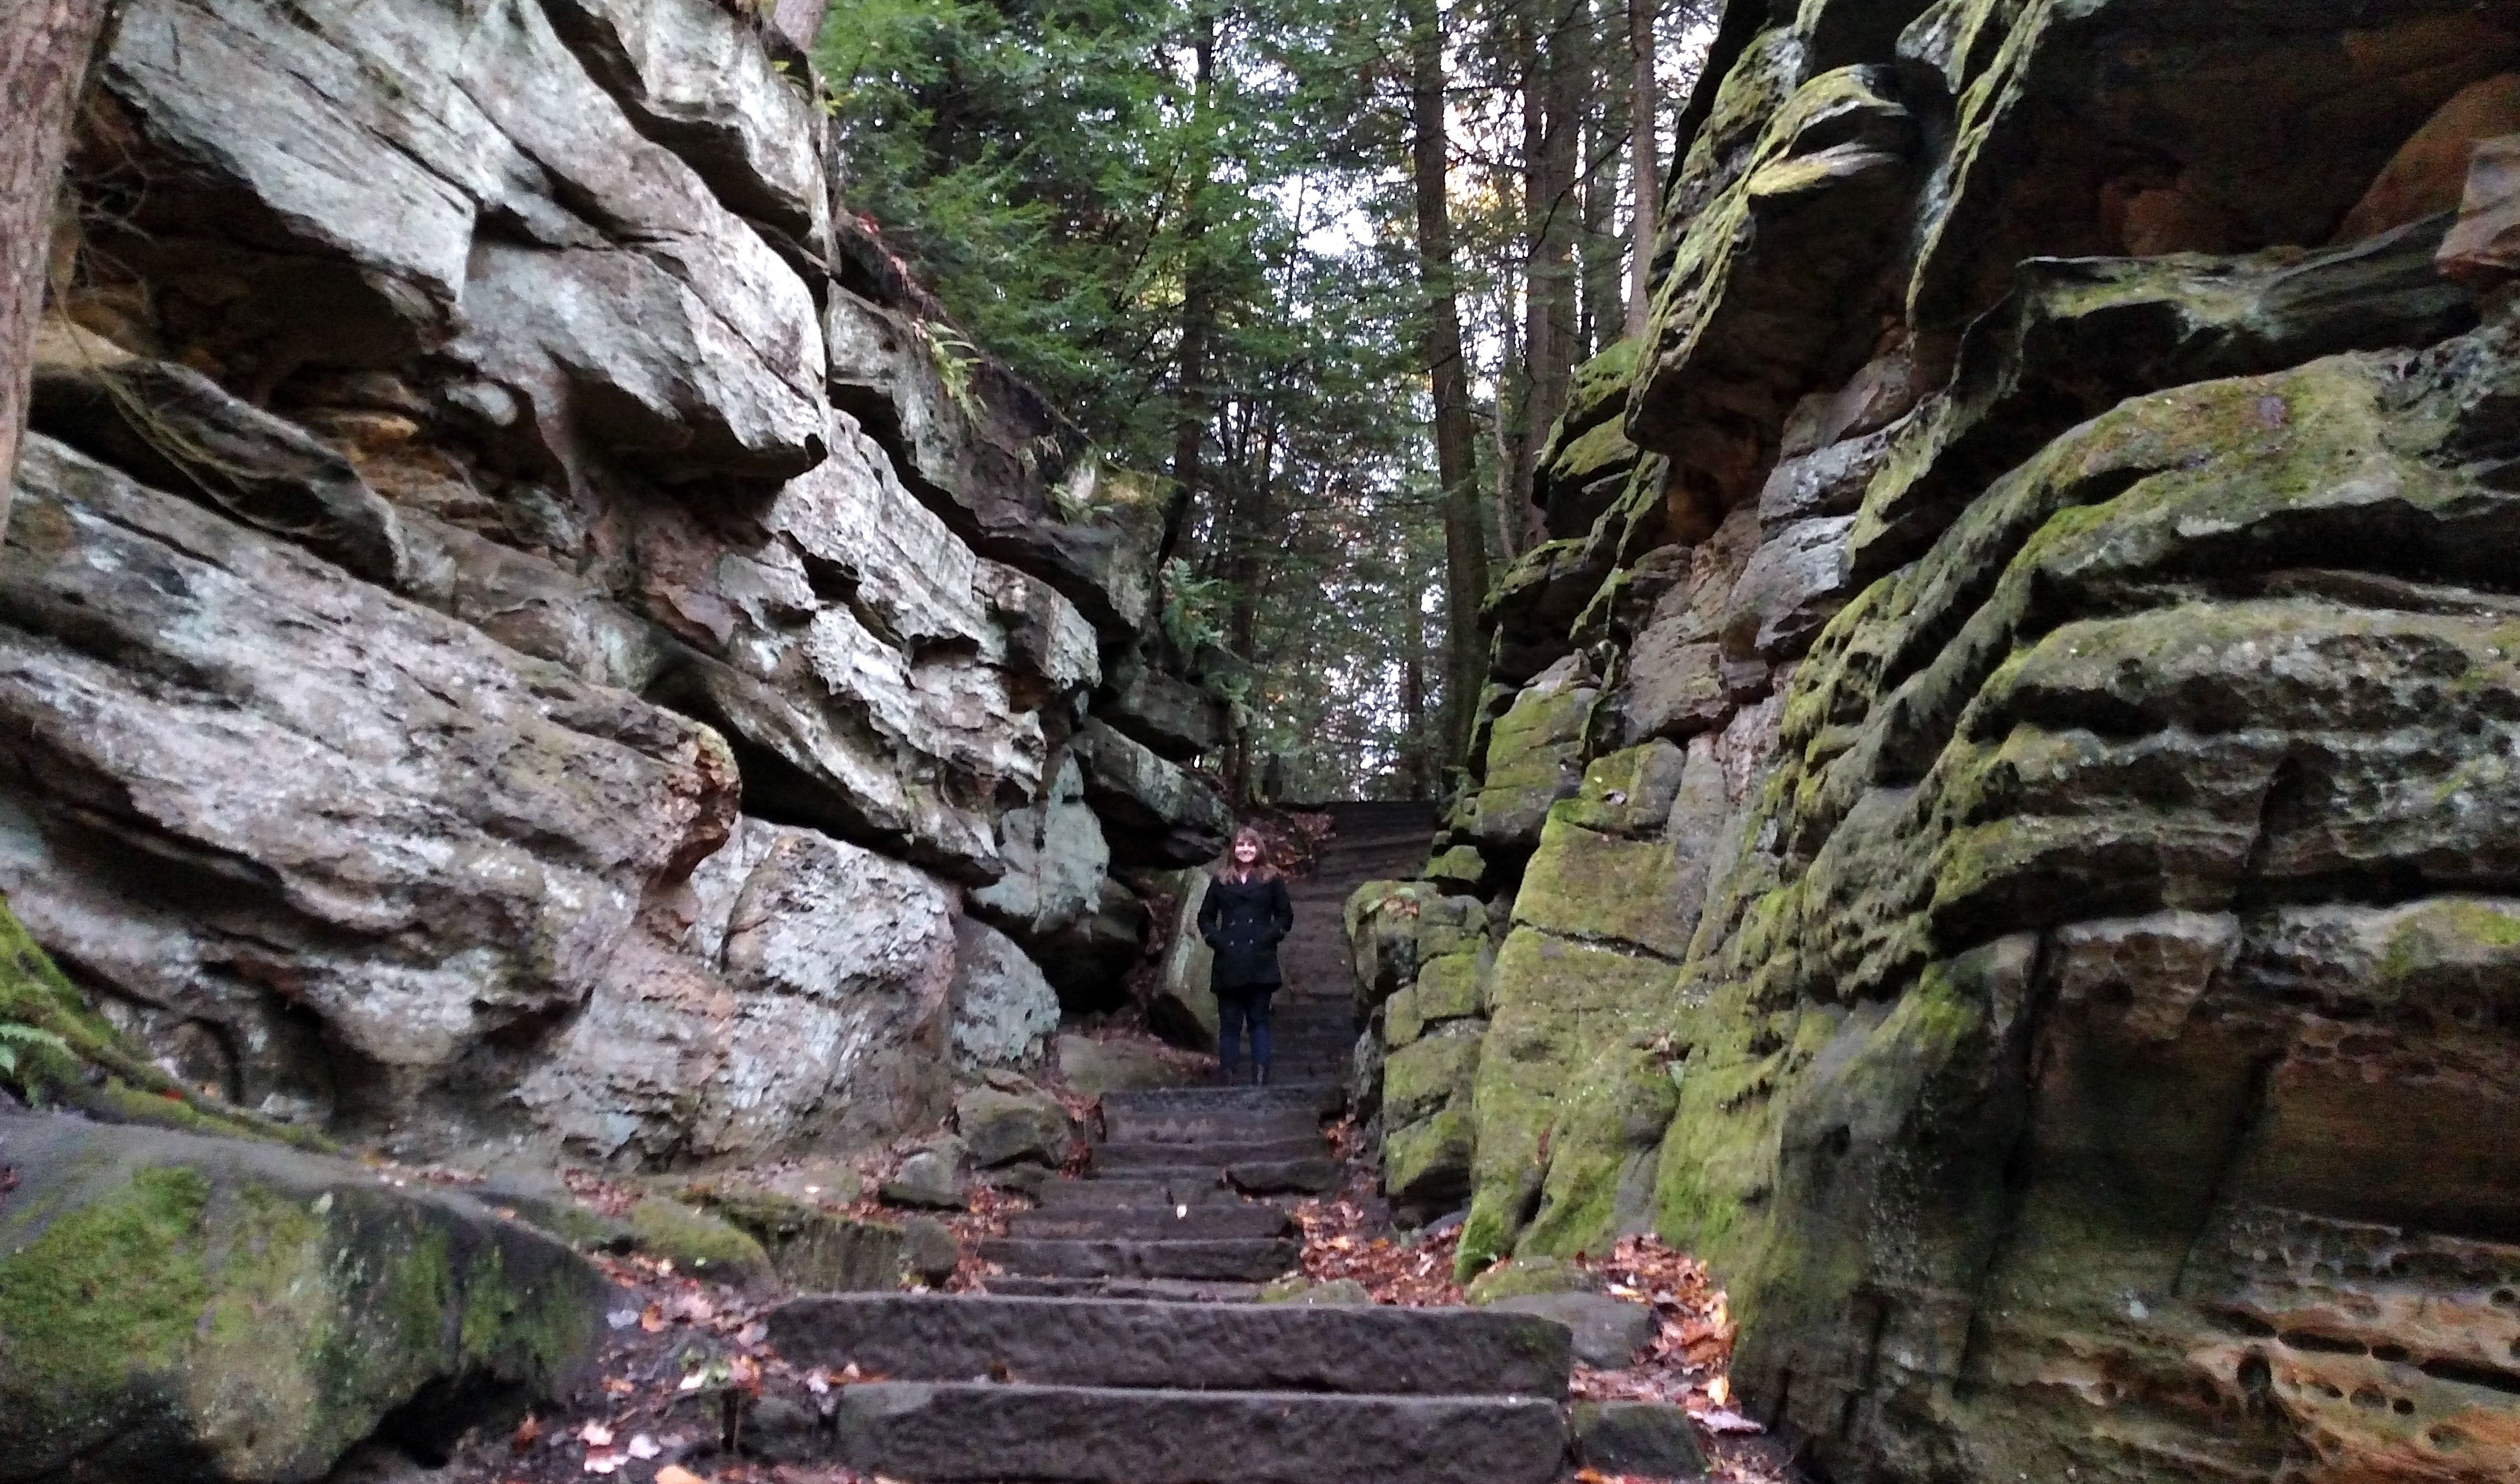 Alissa standing on the Ledges Trail stone staircase, with cliffs on both sides